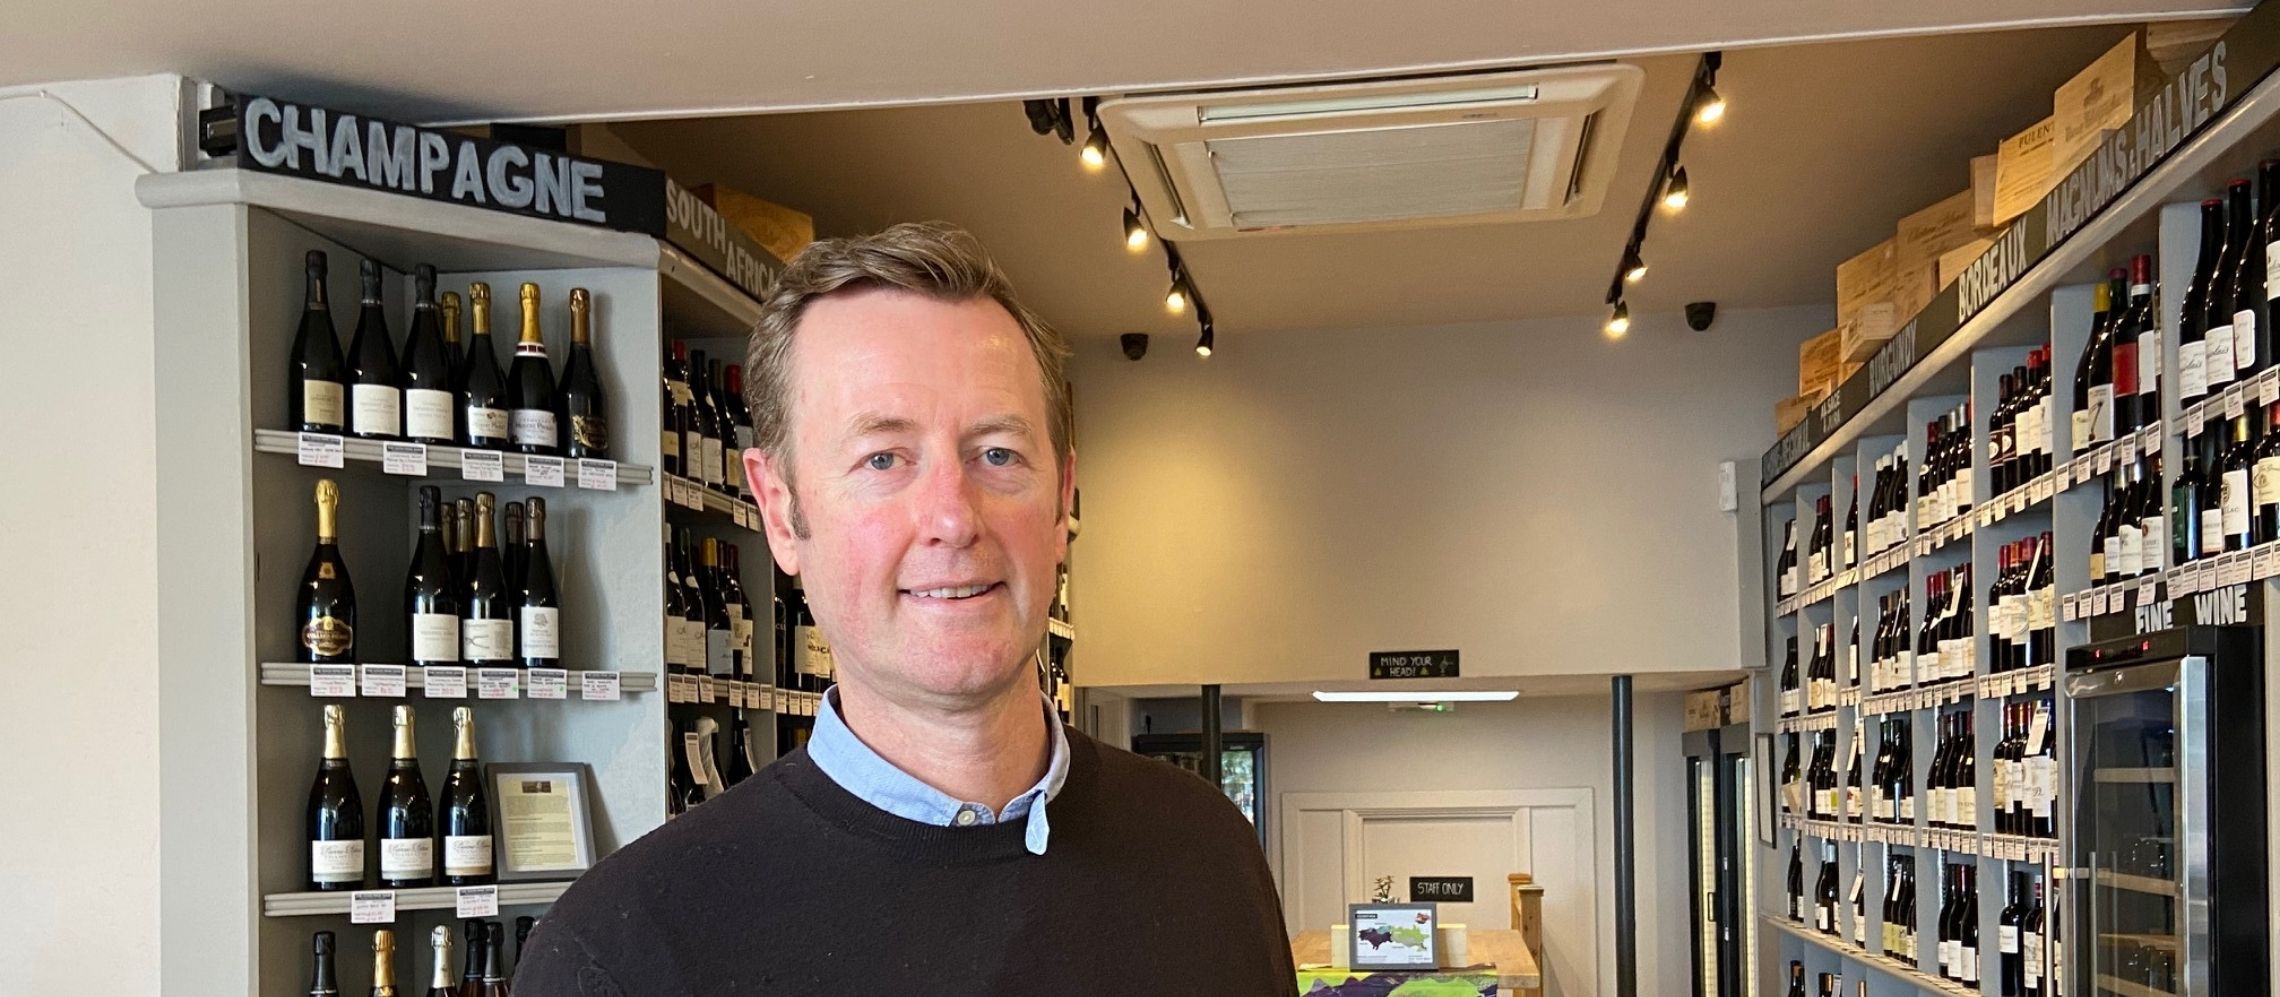 Photo for: Mark Wrigglesworth on why the Good Wine Shop lives up to its name